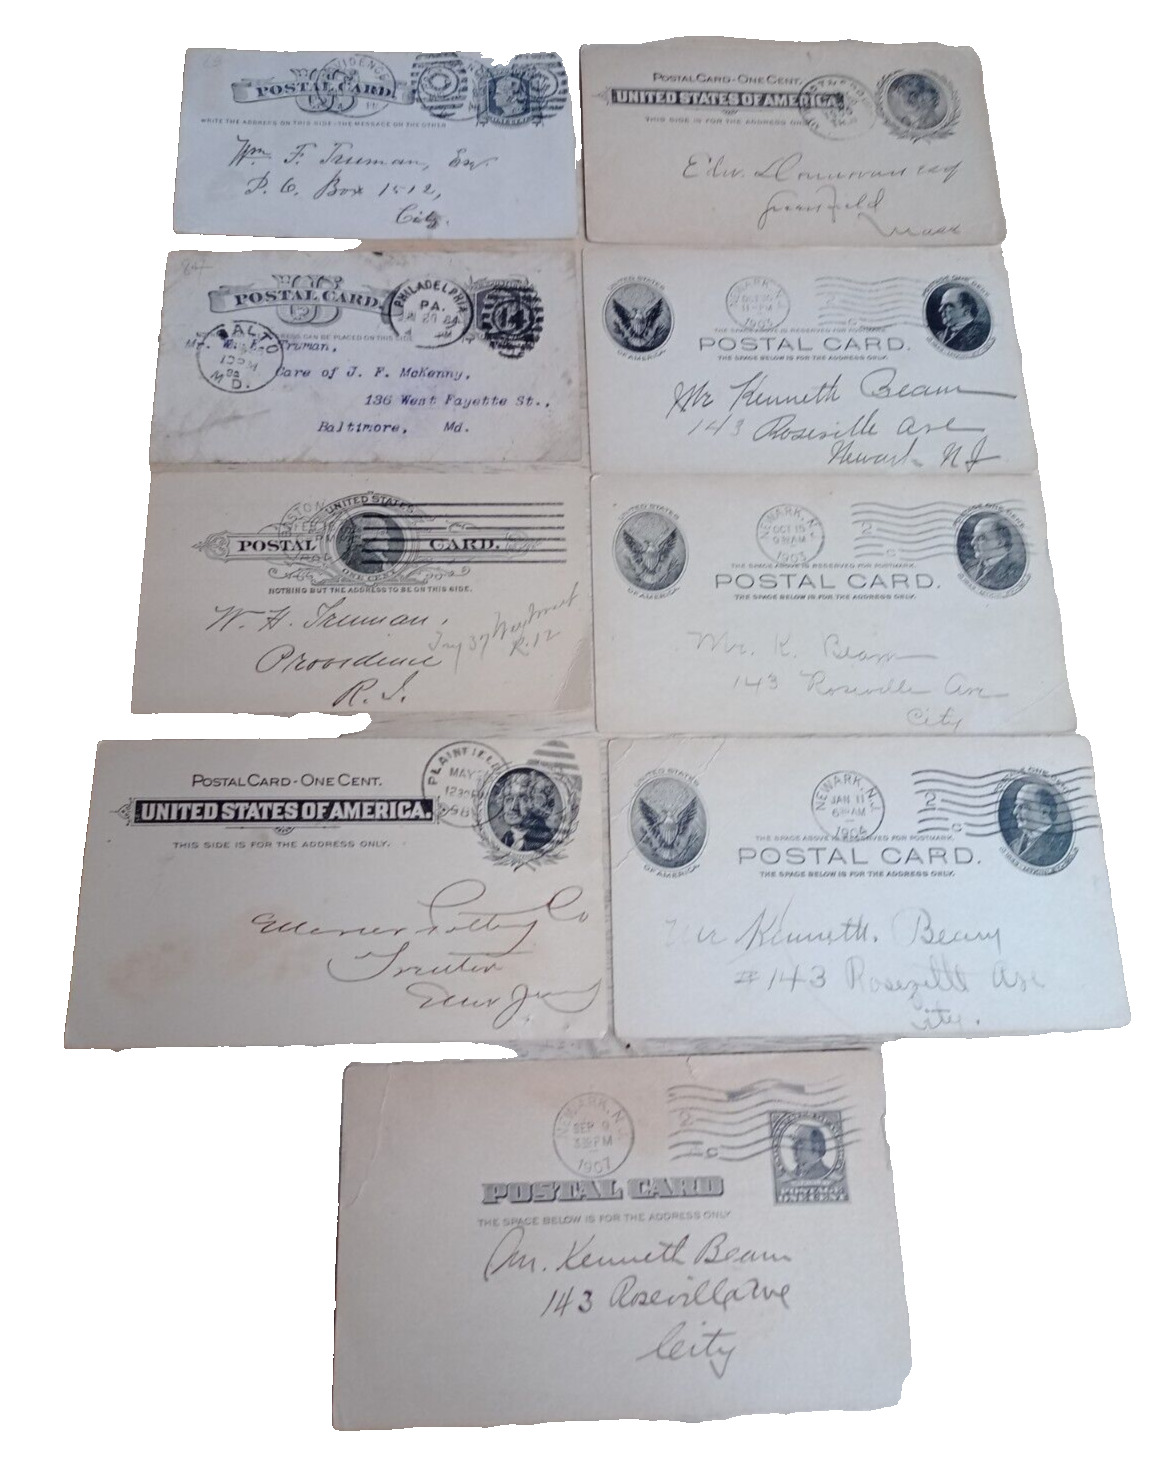 LOT OF 9 EARLY US POSTCARDS, 1883-1907, POLLING PLACE, NAT PUB, UNITARIAN, BUSNS